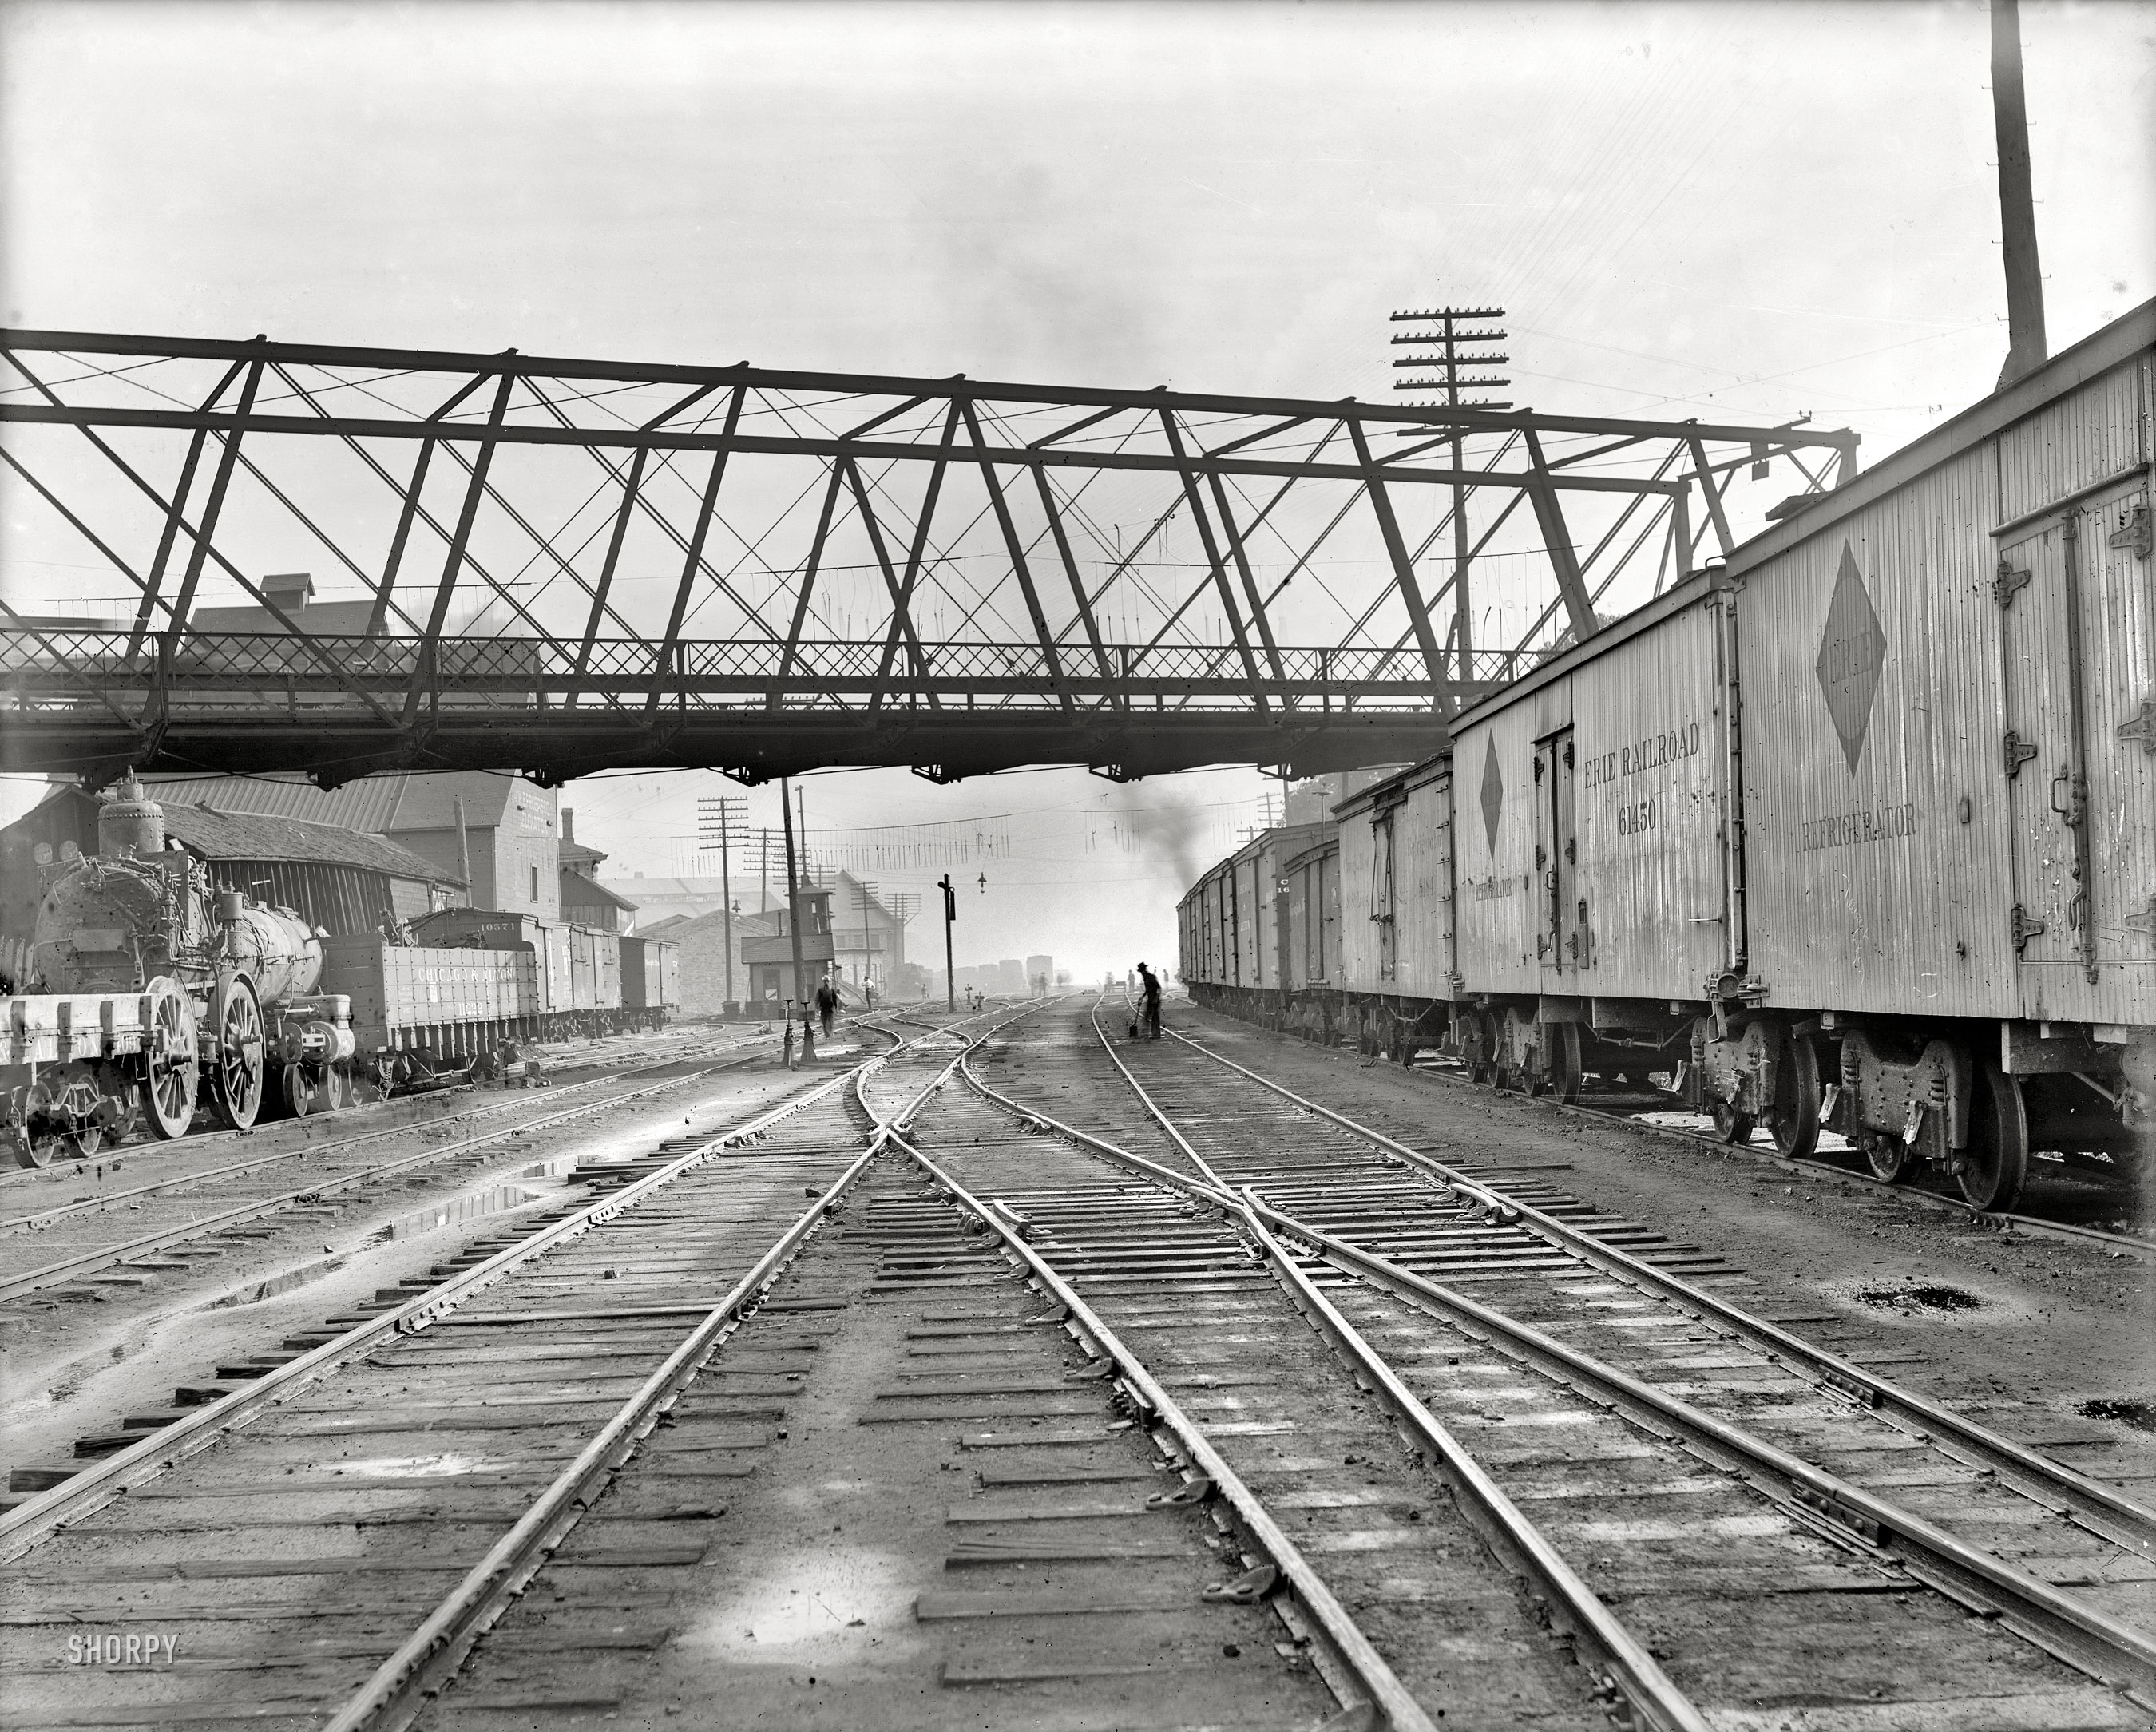 Bloomington, Illinois, circa 1900. "Track to be straightened in the Bloomington yards." 8x10 inch dry plate glass negative, Detroit Publishing Co. View full size.